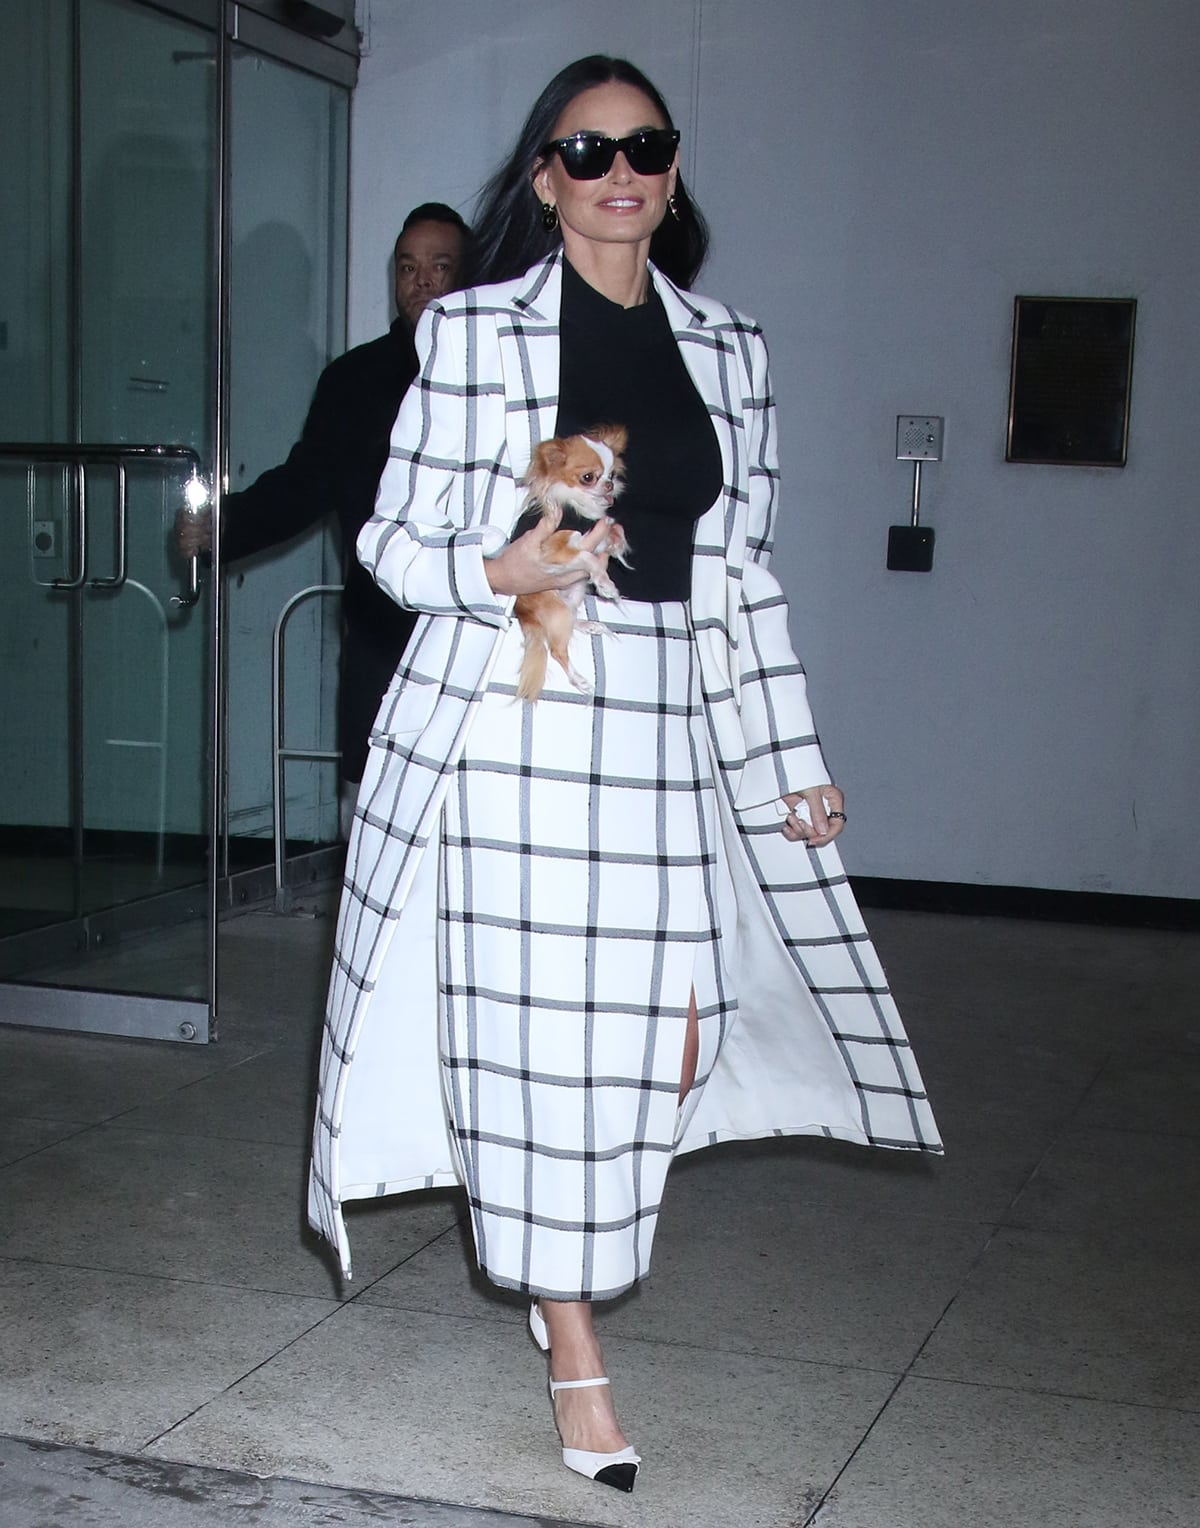 Demi Moore visits The Drew Barrymore Show in a black and white Carolina Herrera plaid coat and midi skirt to promote Feud: Capote vs. The Swans with her Chihuahua Pilaf